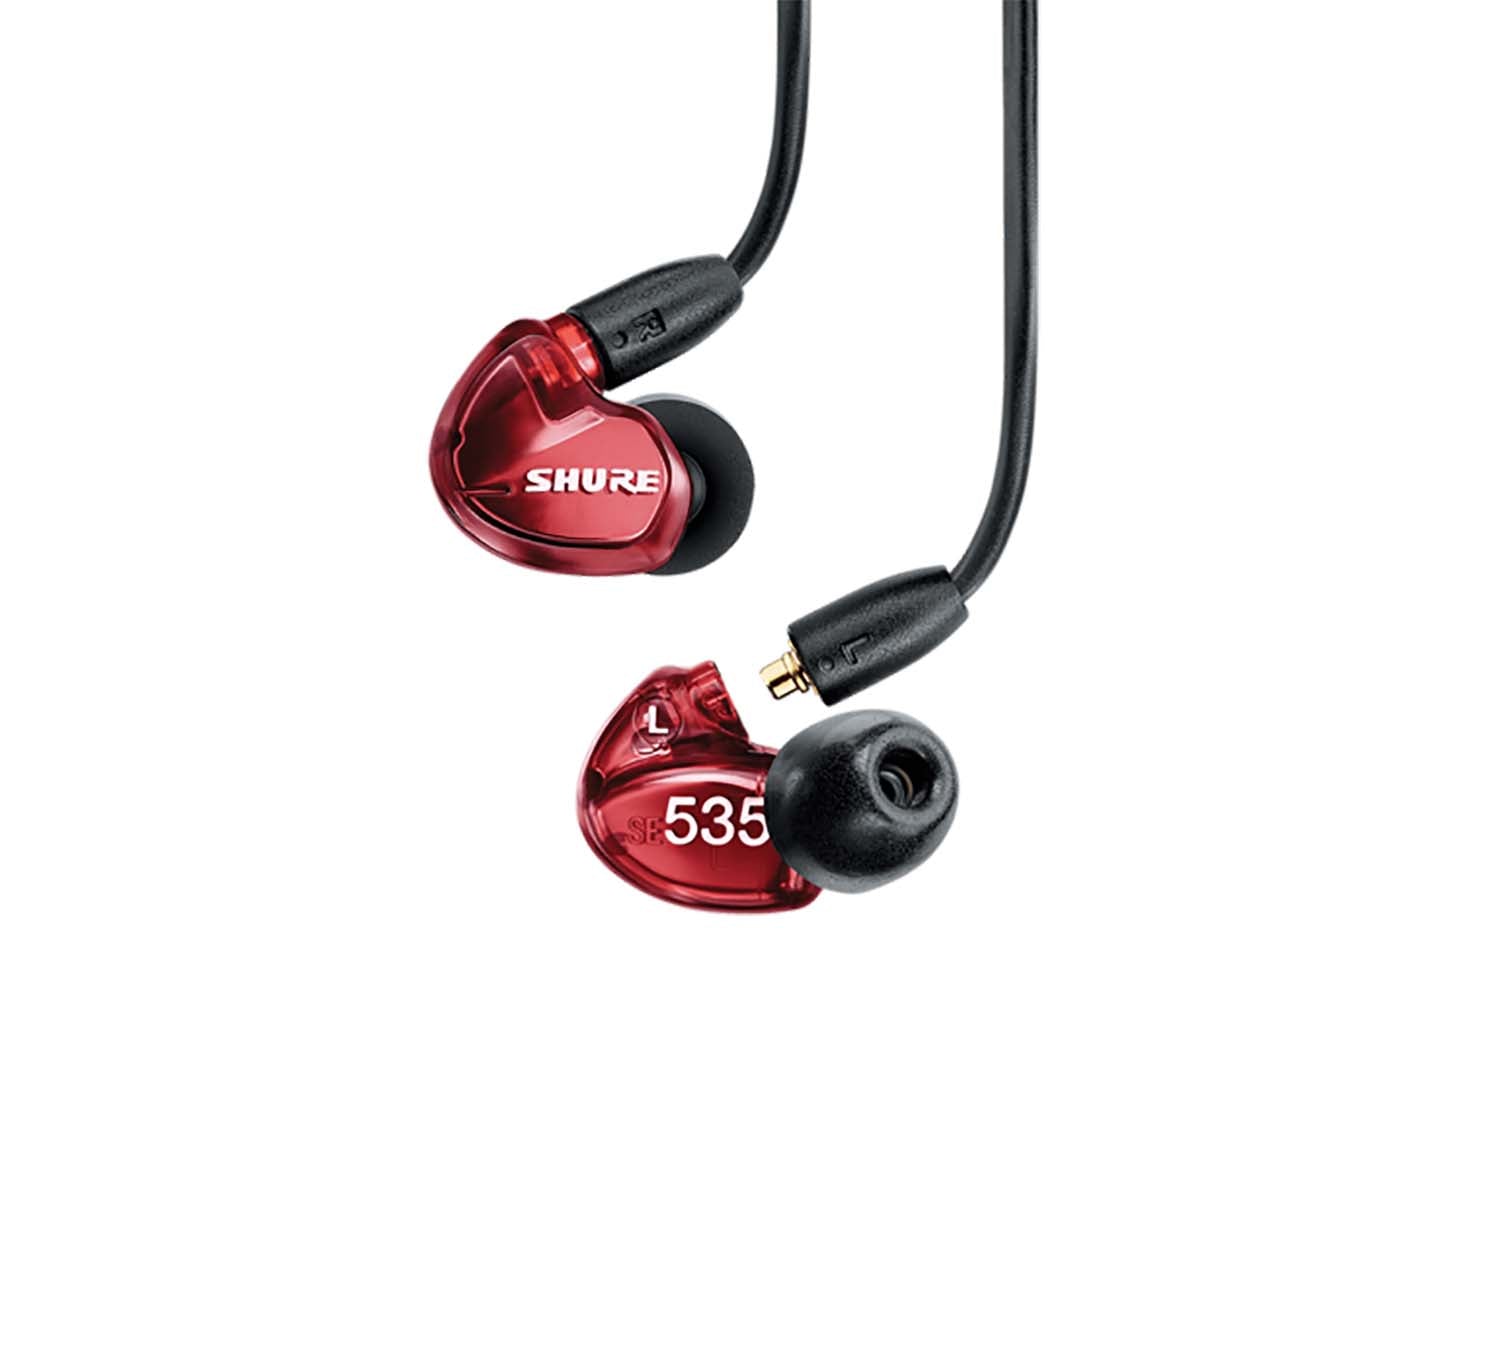 Shure SE535LTD+UNI Special Edition Sound Isolating Earphones - Red - Hollywood DJ